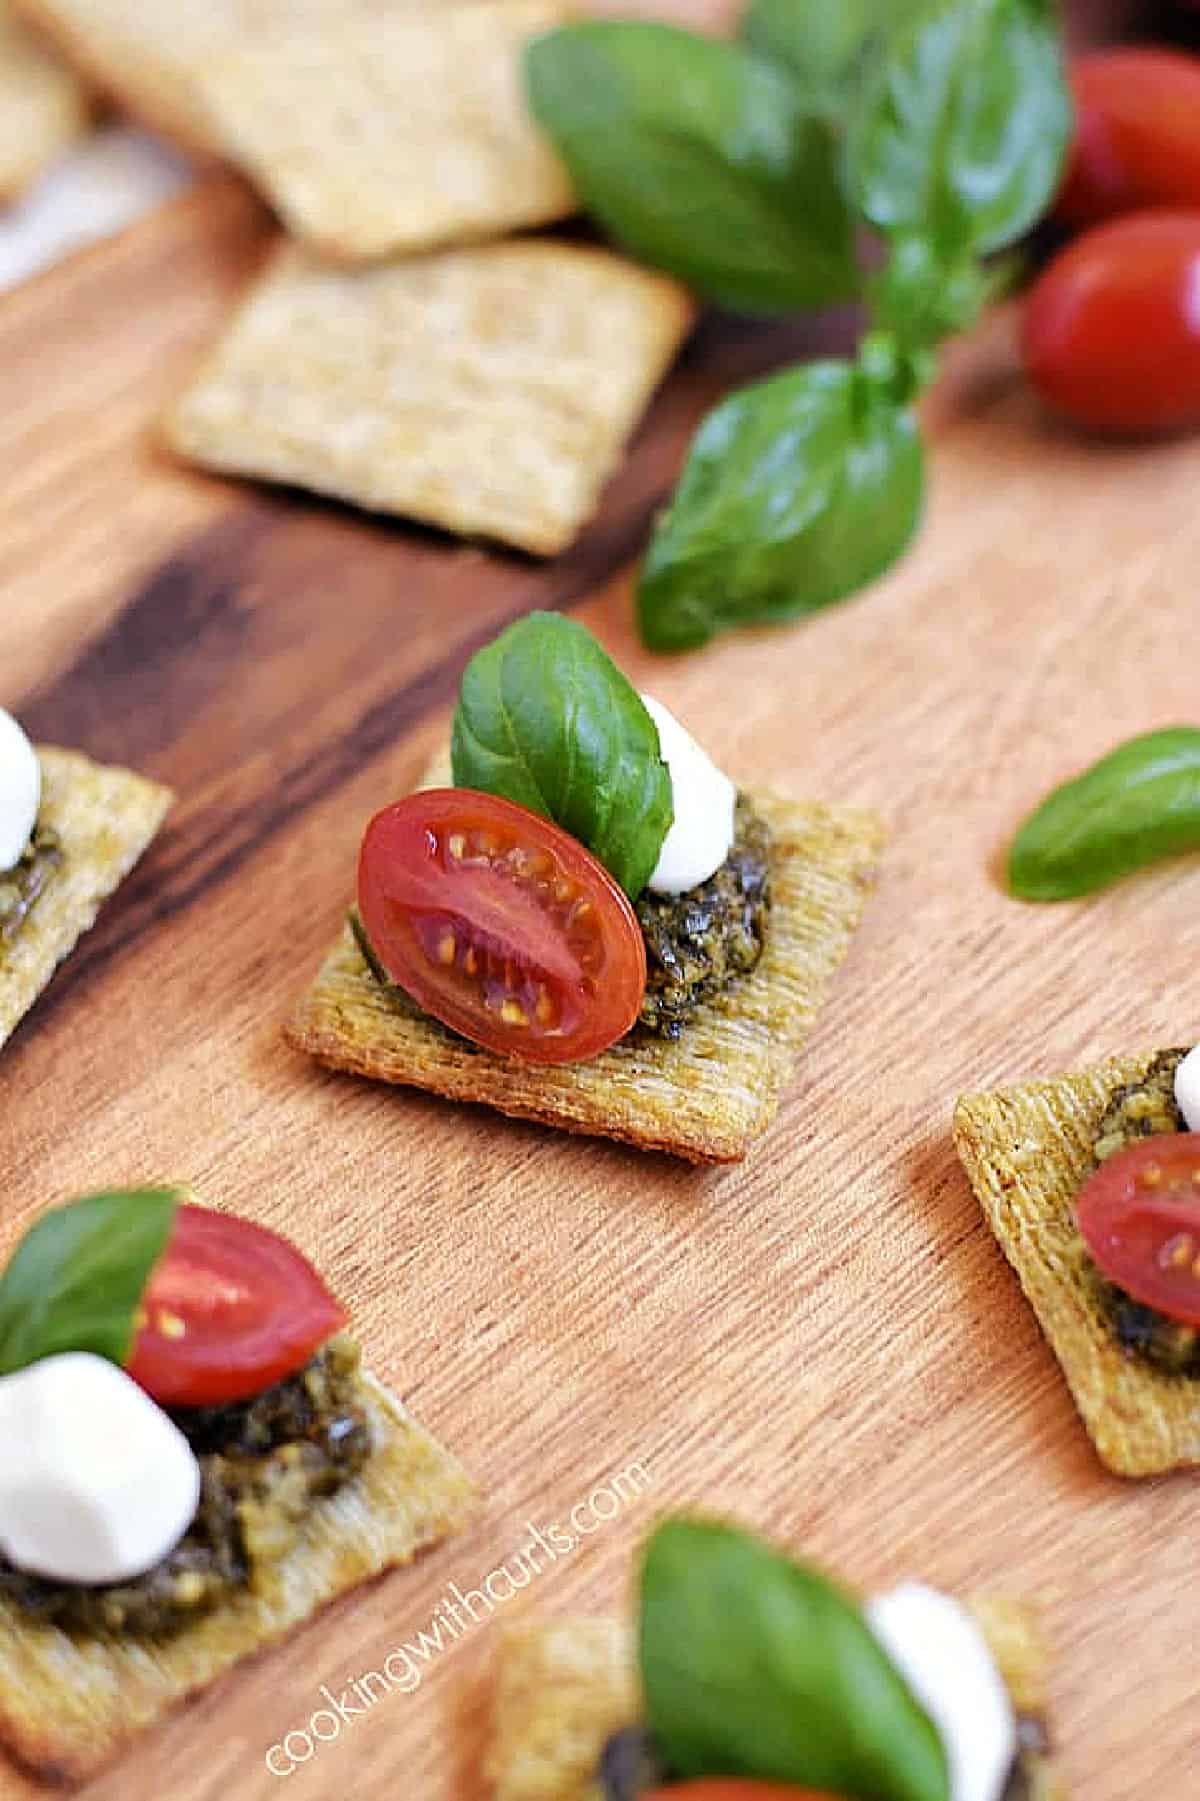 Five crackers topped with basil pesto, mozzarella pearl, cherry tomato half, and basil leaf on a serving board.